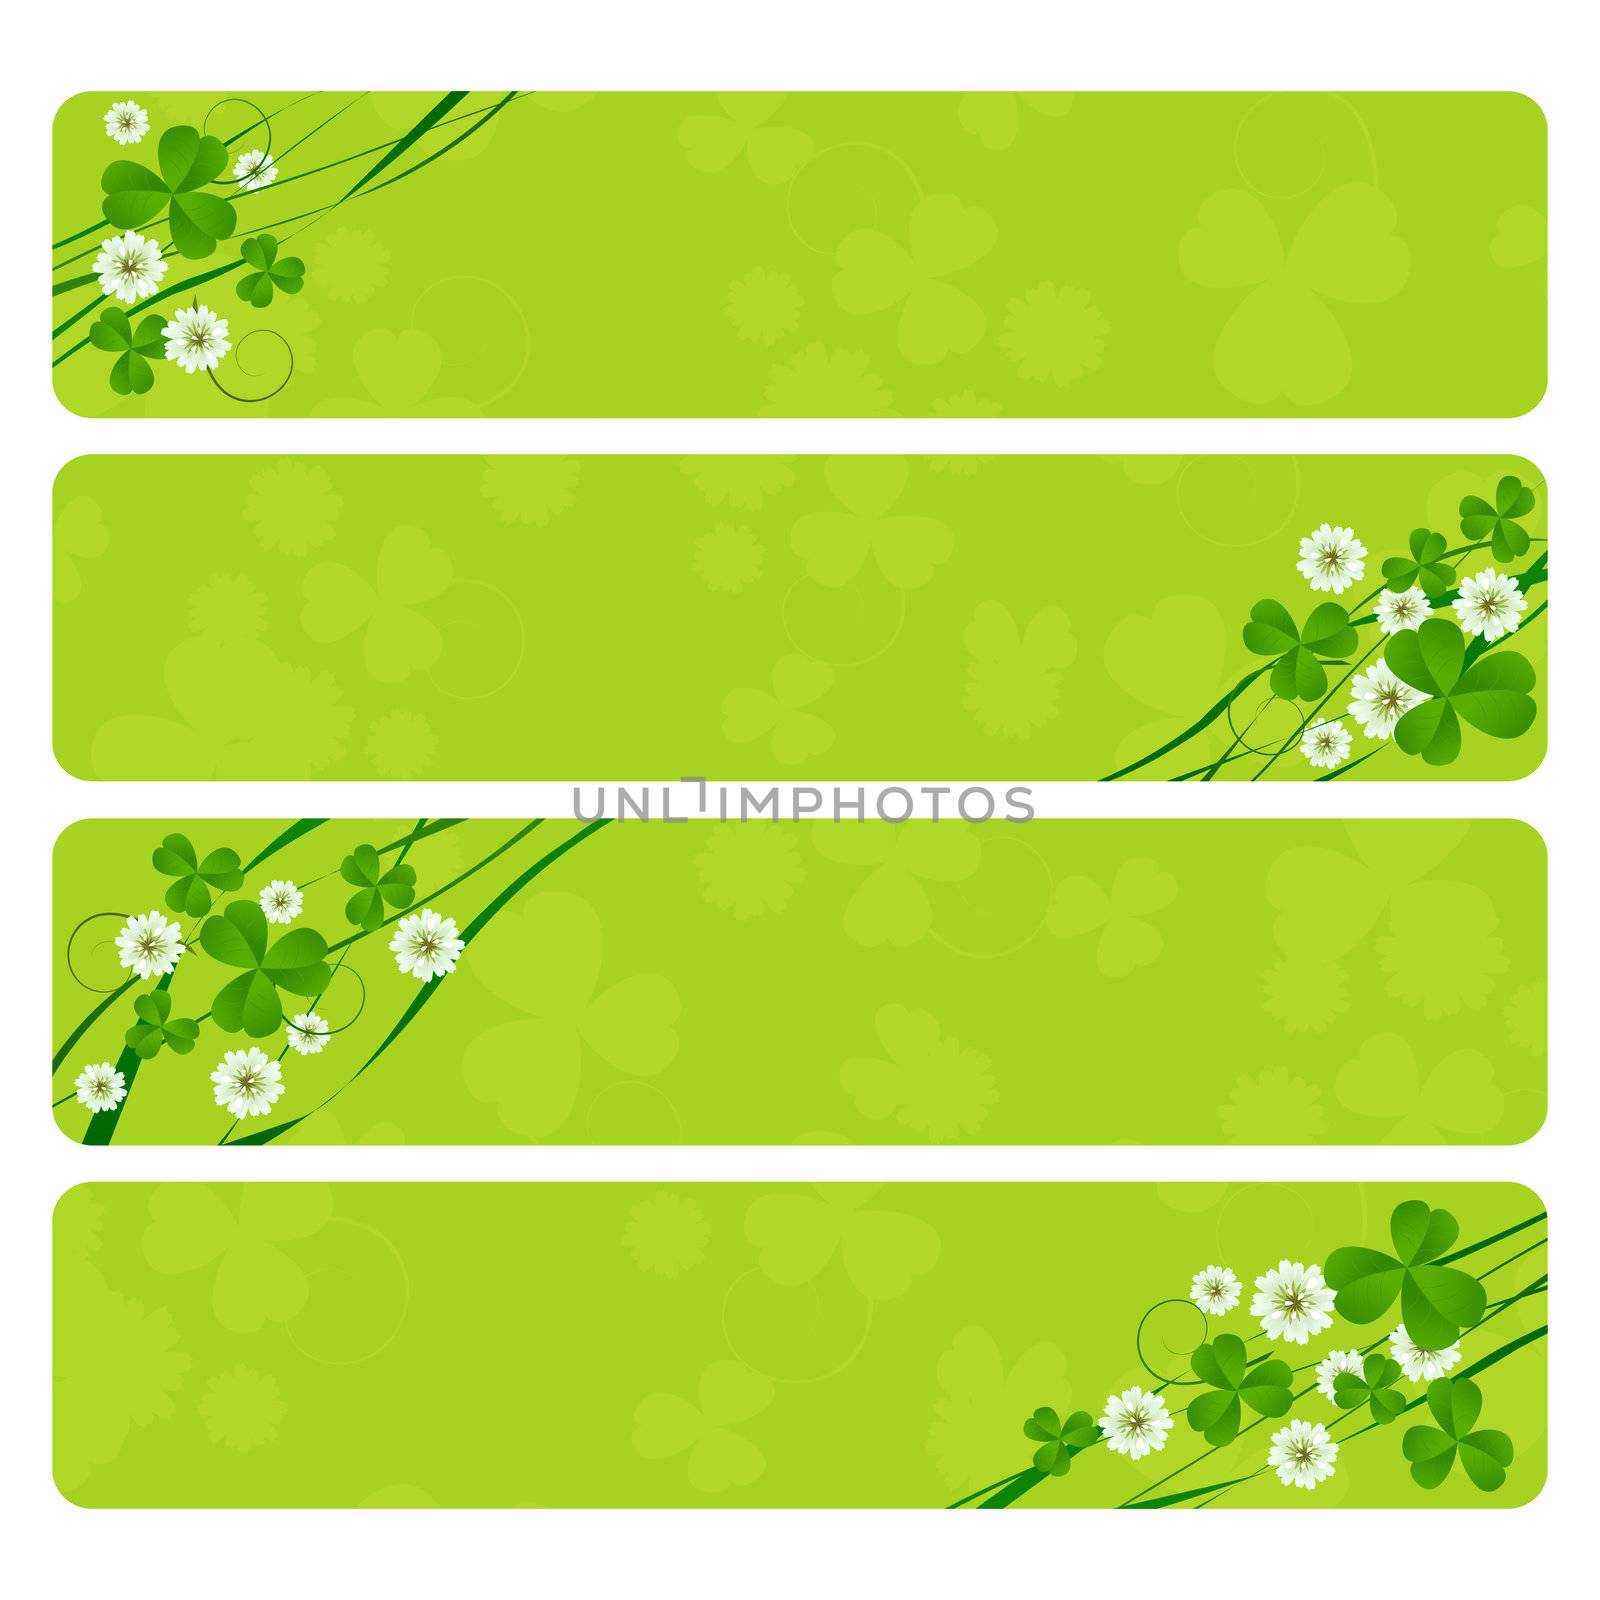 St. Patrick's Day header collection with clover foliage